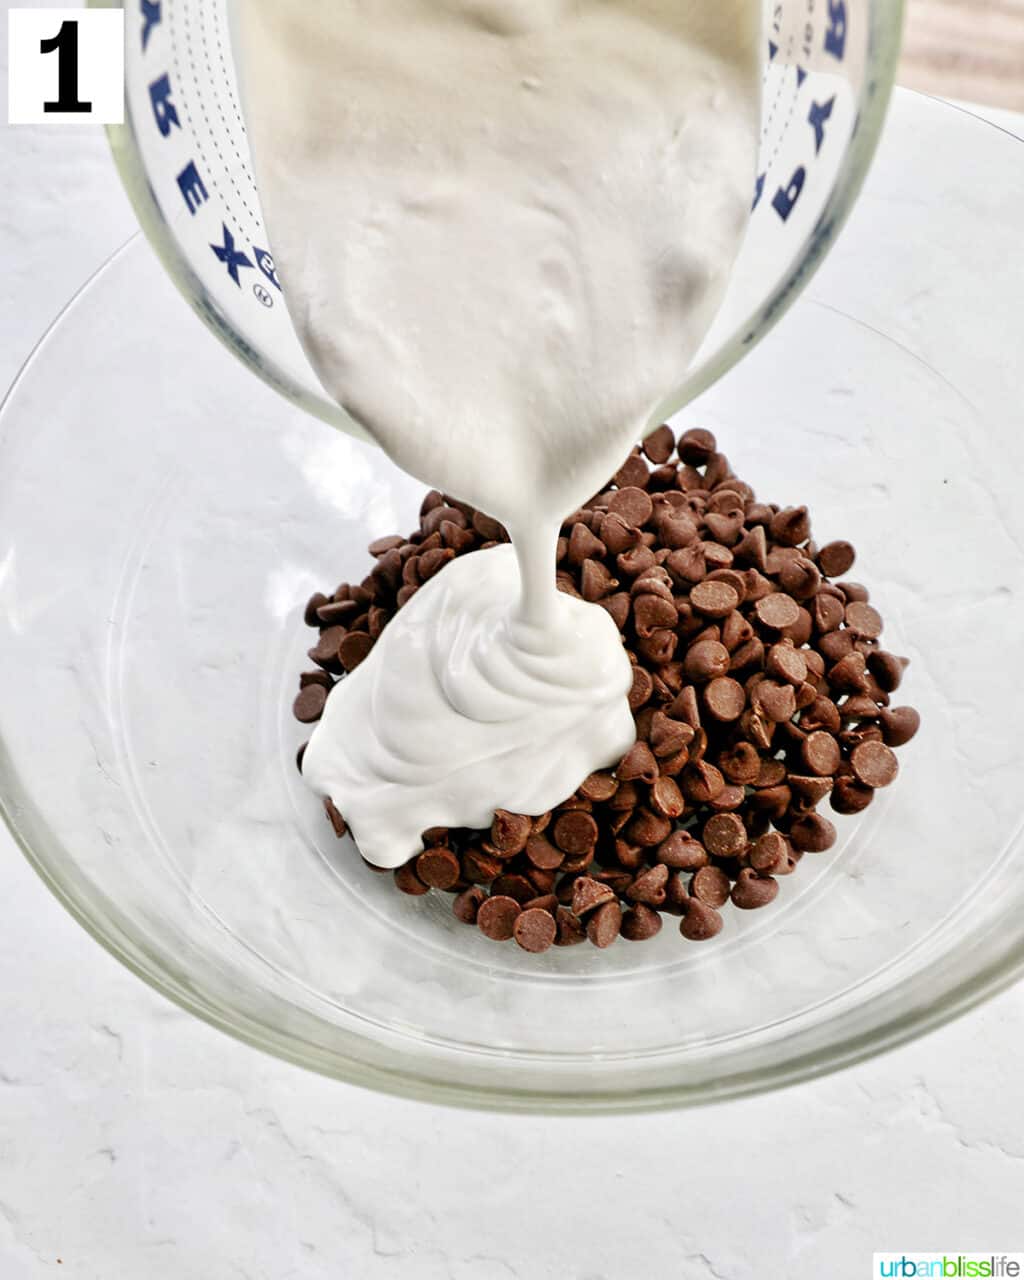 pouring heavy cream into a bowl with chocolate chips.